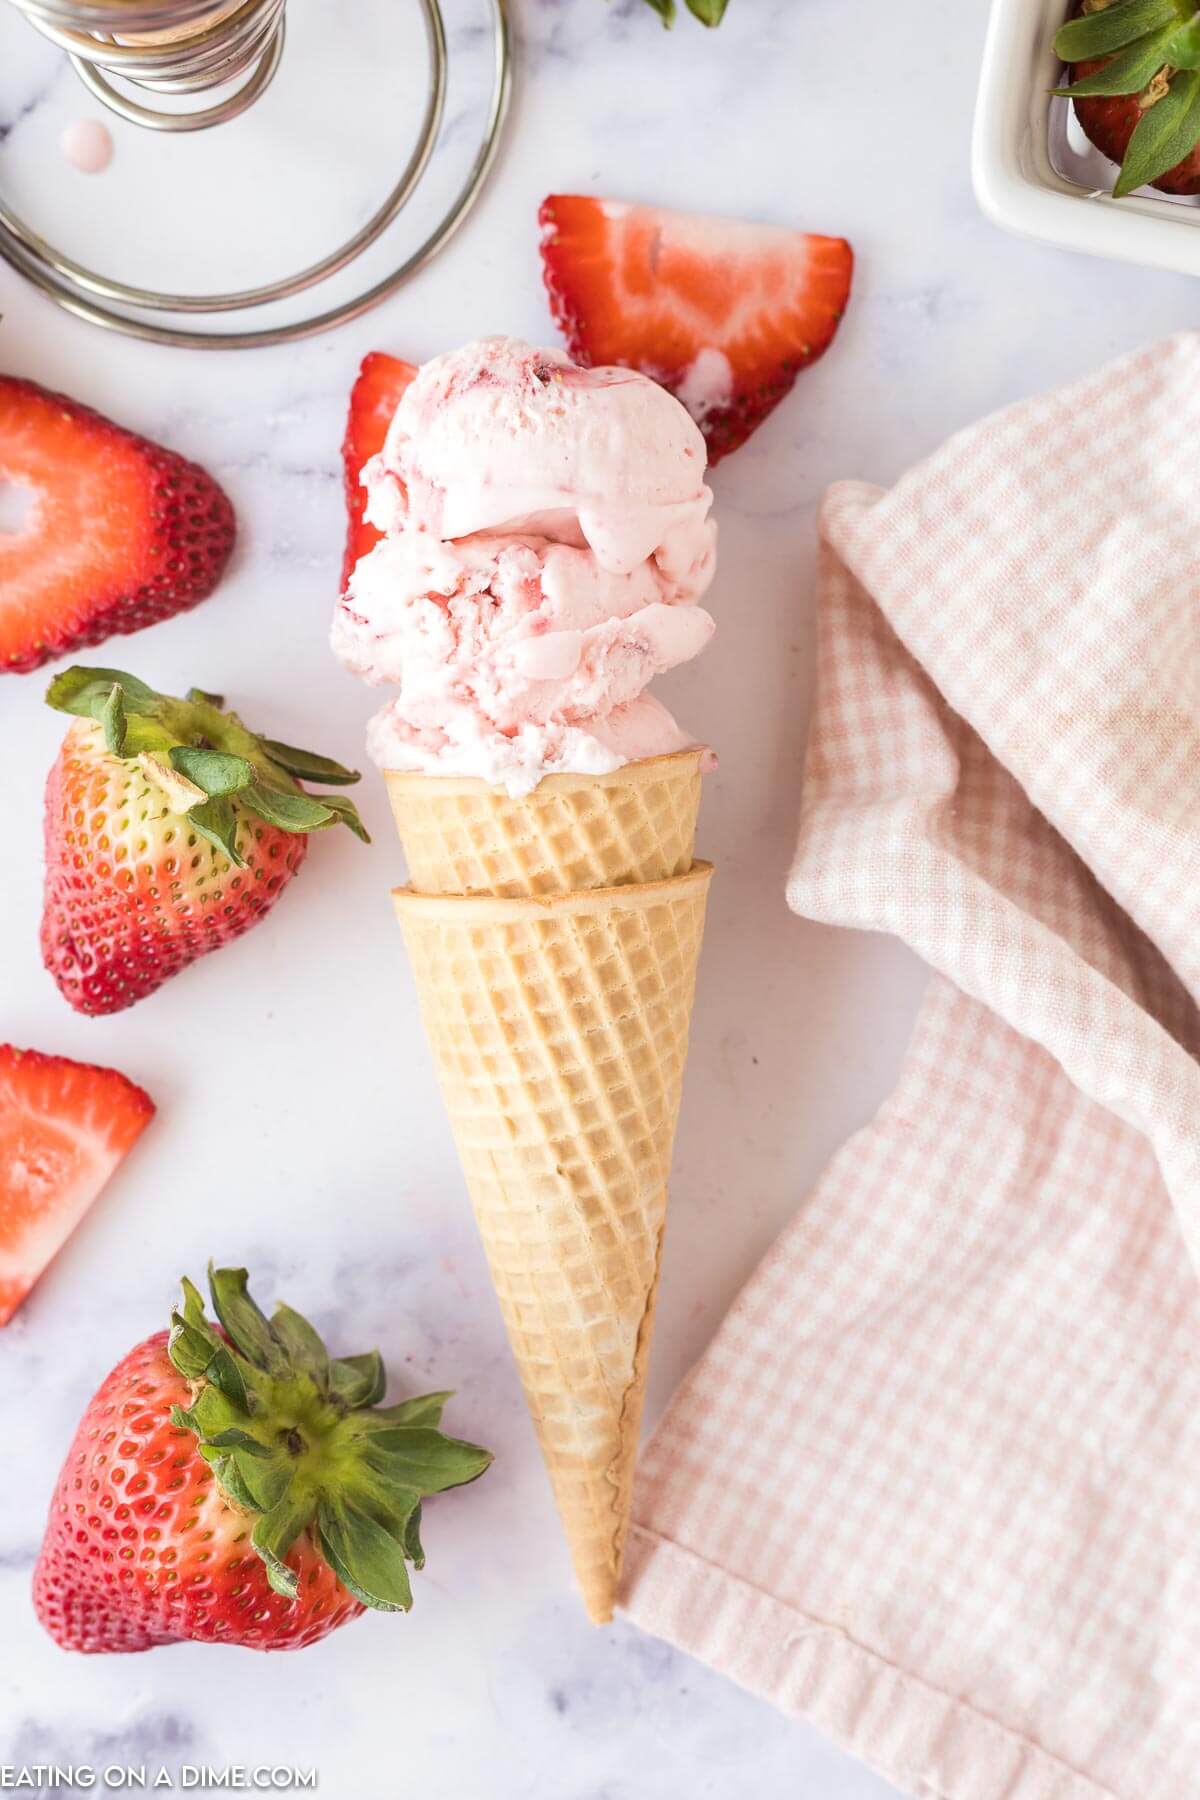 Scoops of Strawberry Ice Cream on a cone